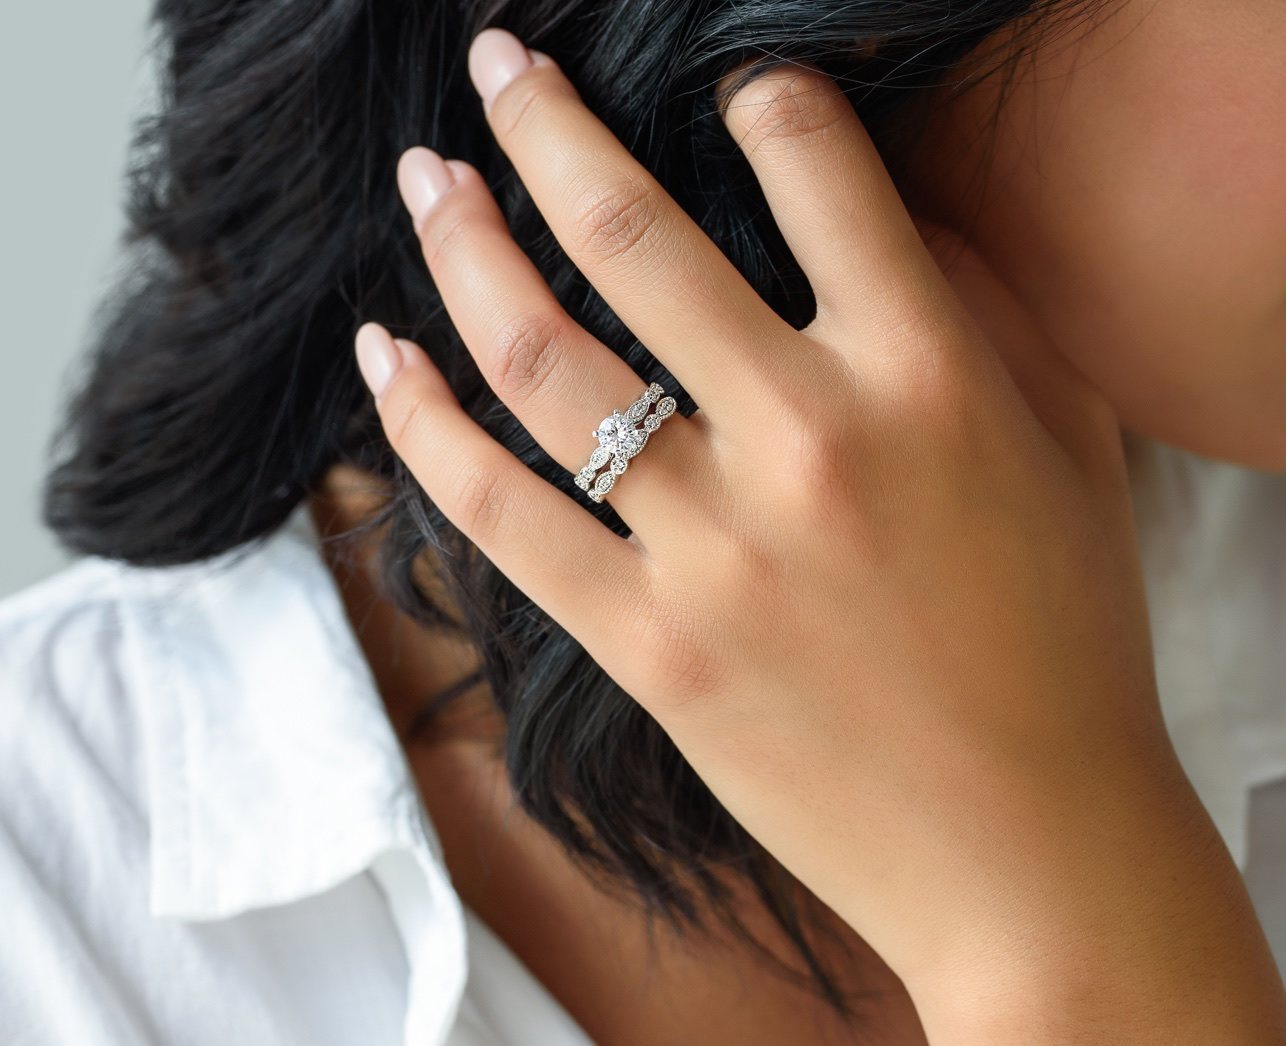 Ring featured image